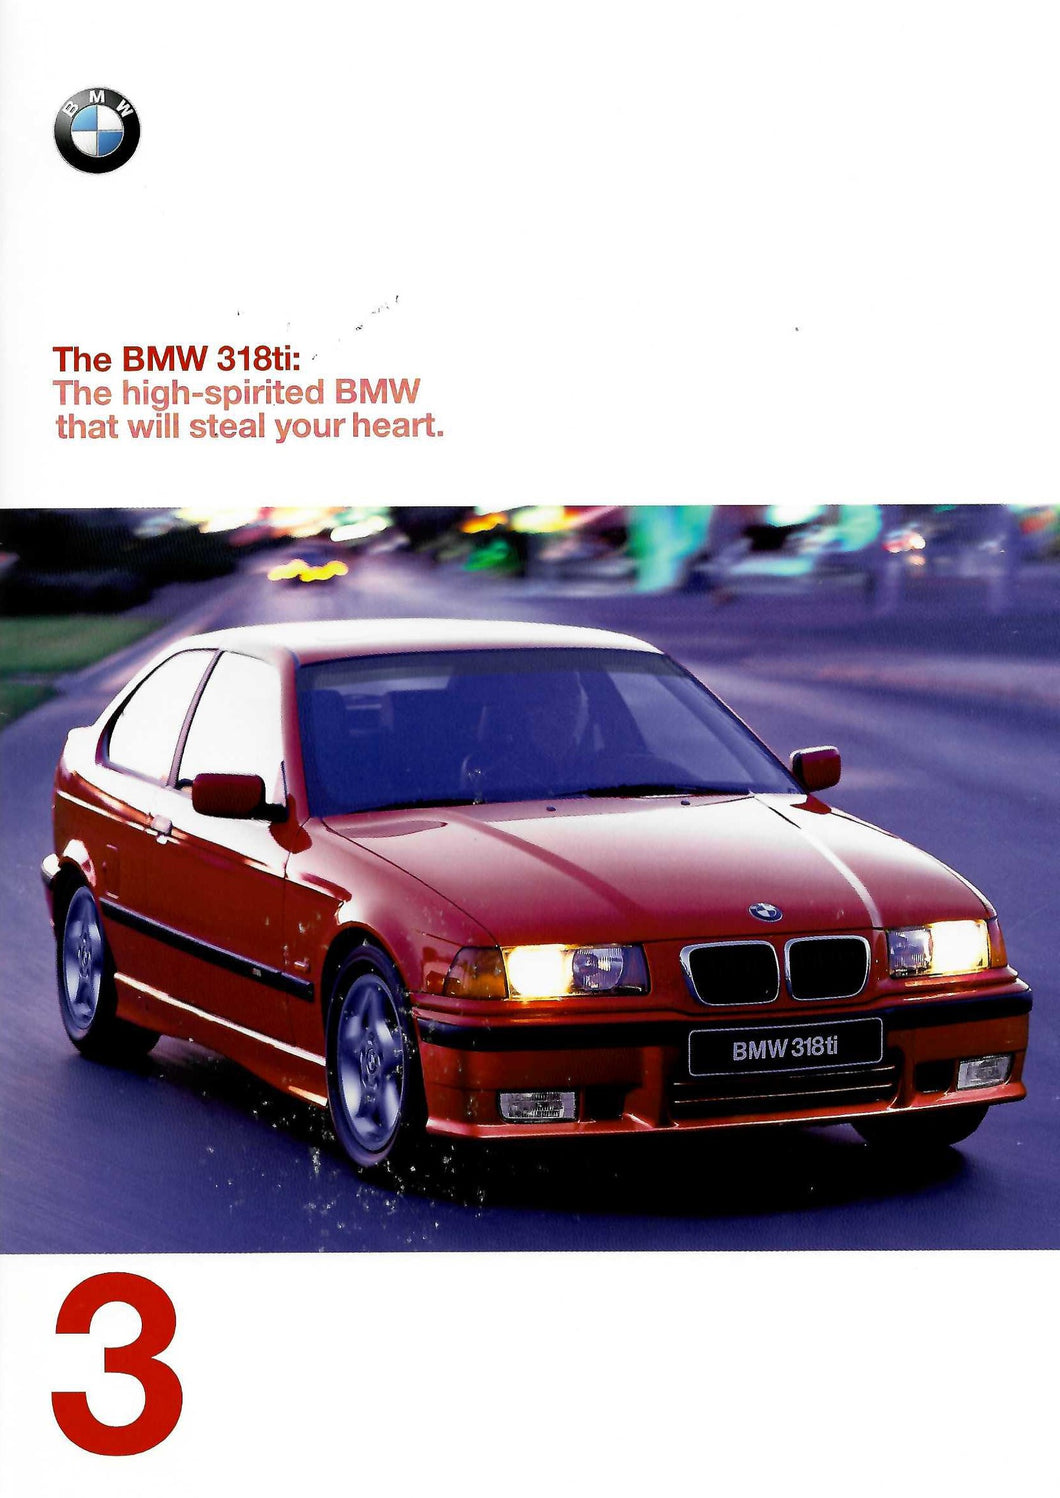 Brochure - The BMW 318ti: The high-spirited BMW that will steal your heart.